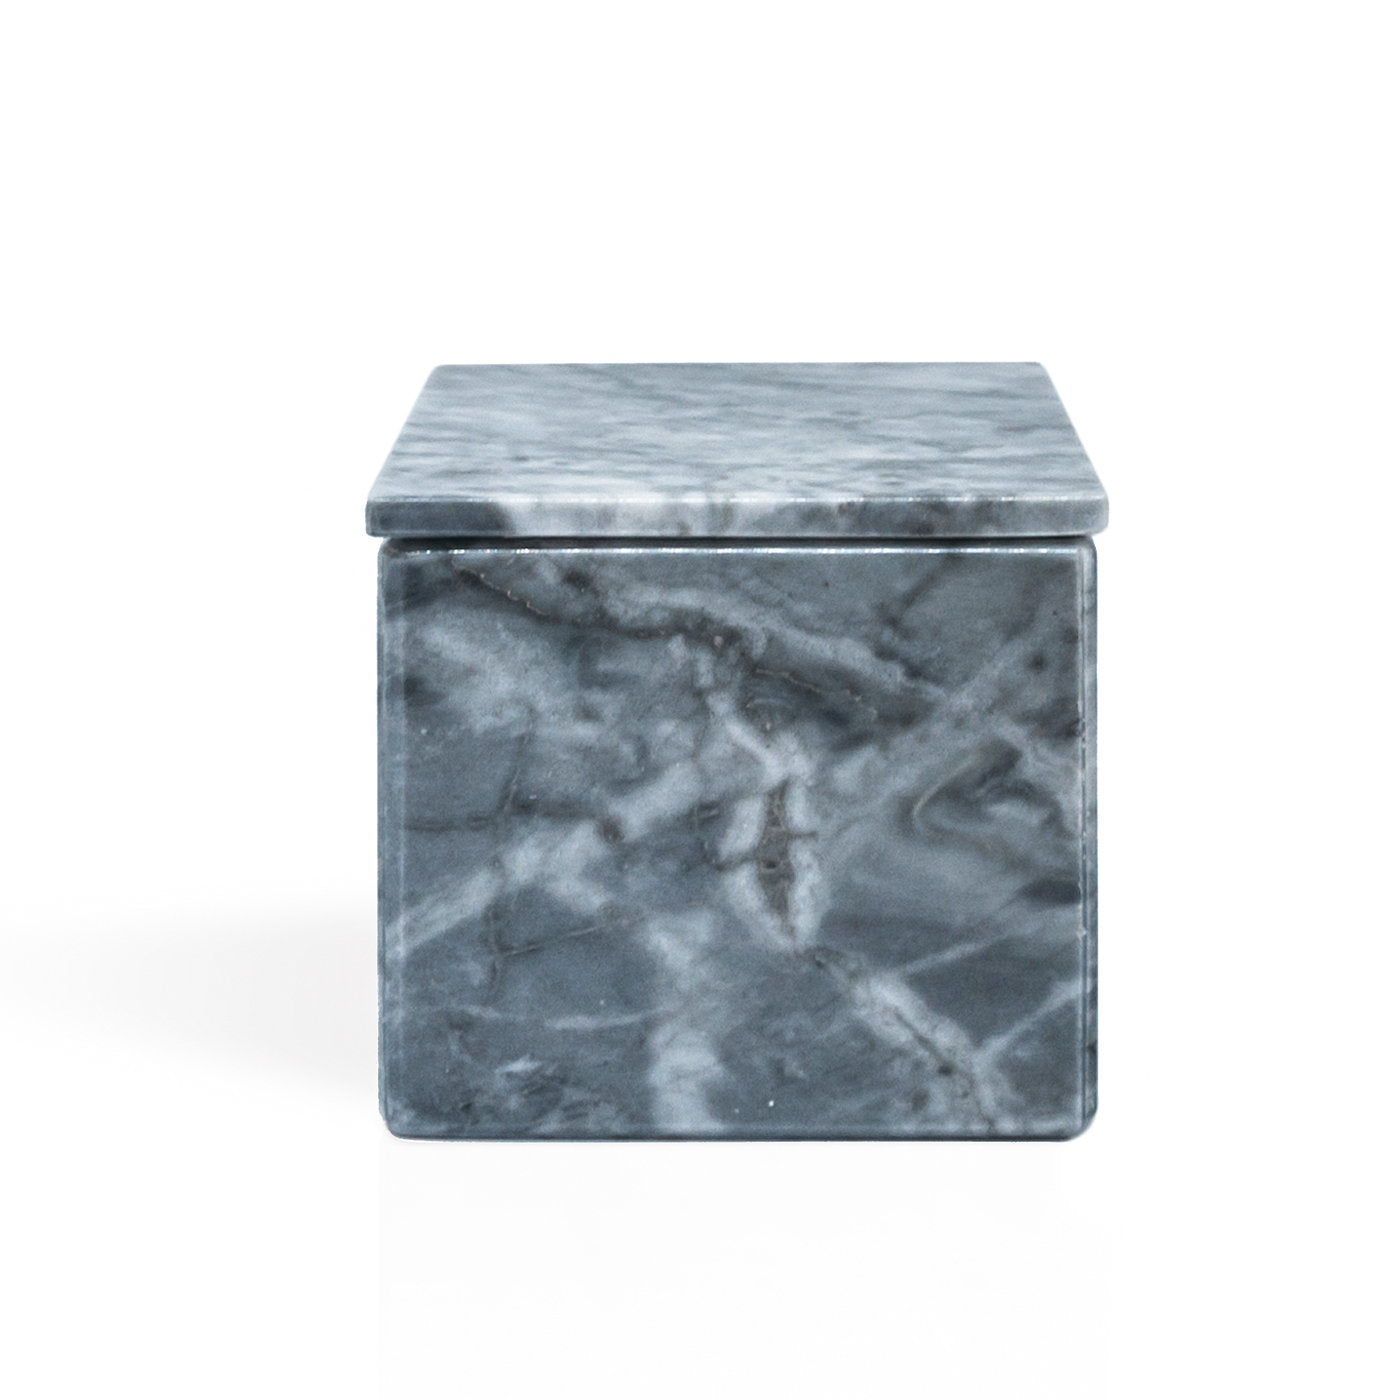 Gray Bardiglio Marble Cubic Box with Lid - Alternative view 1